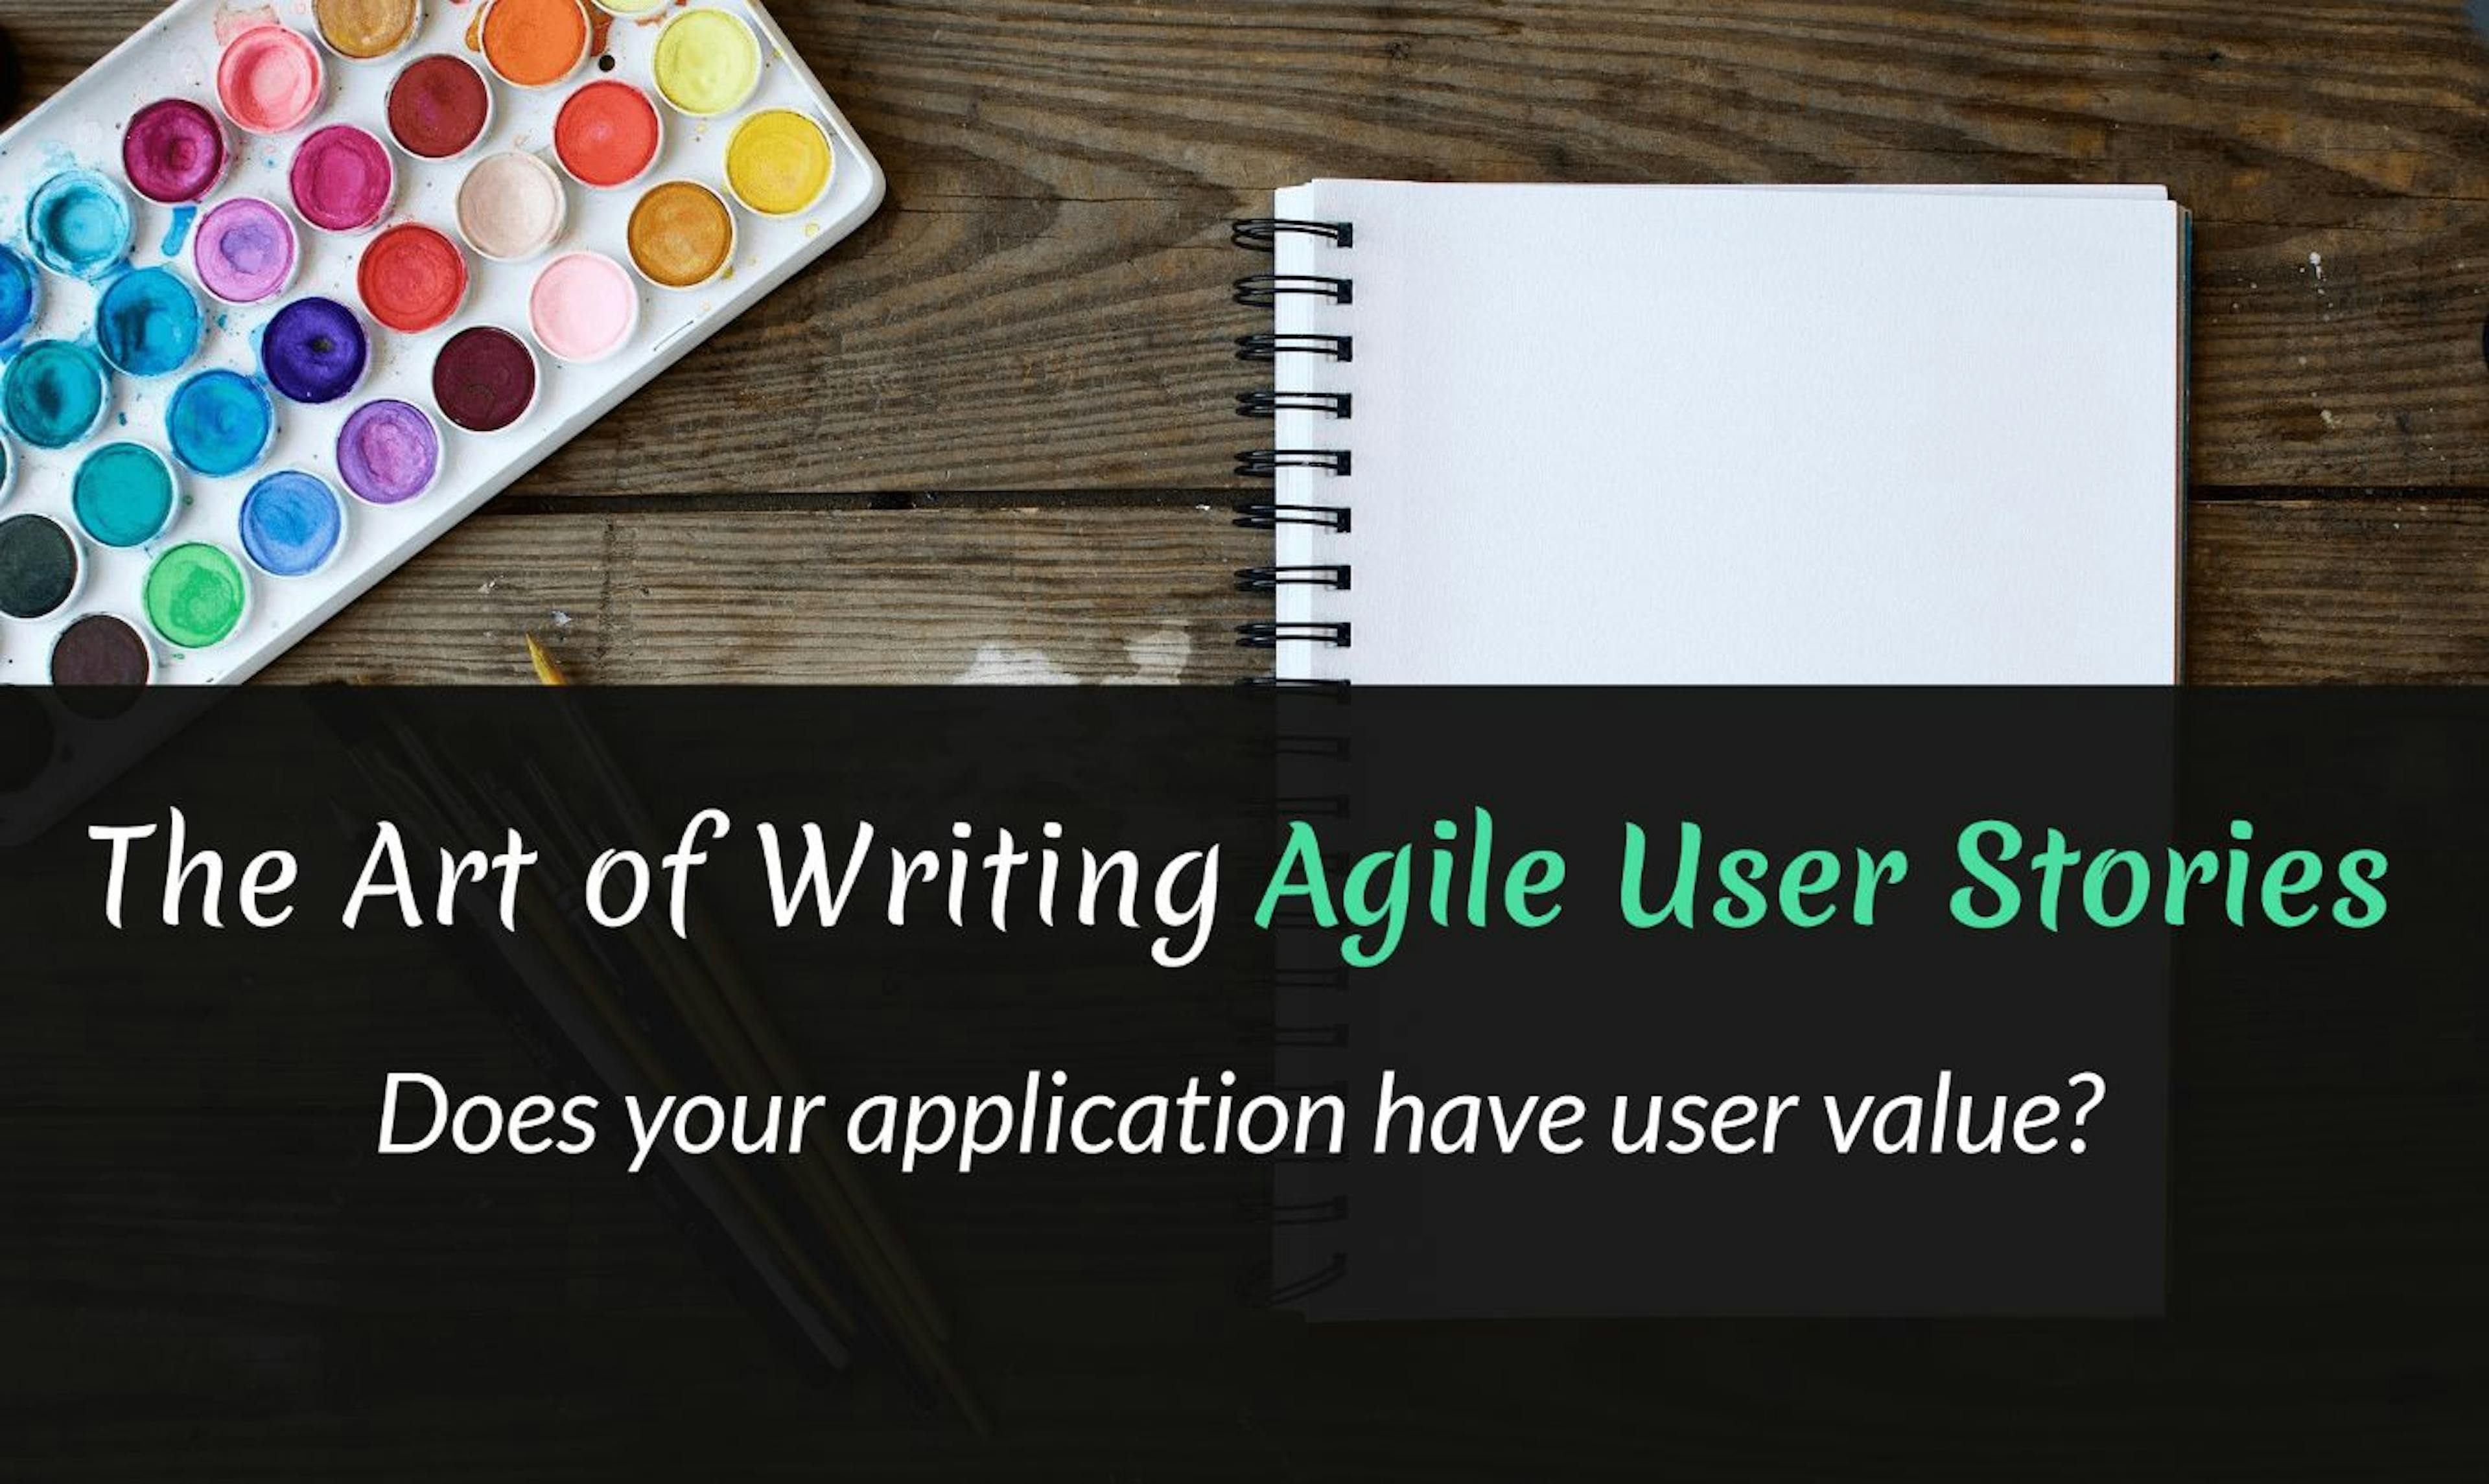 featured image - The Art of Writing Agile User Stories